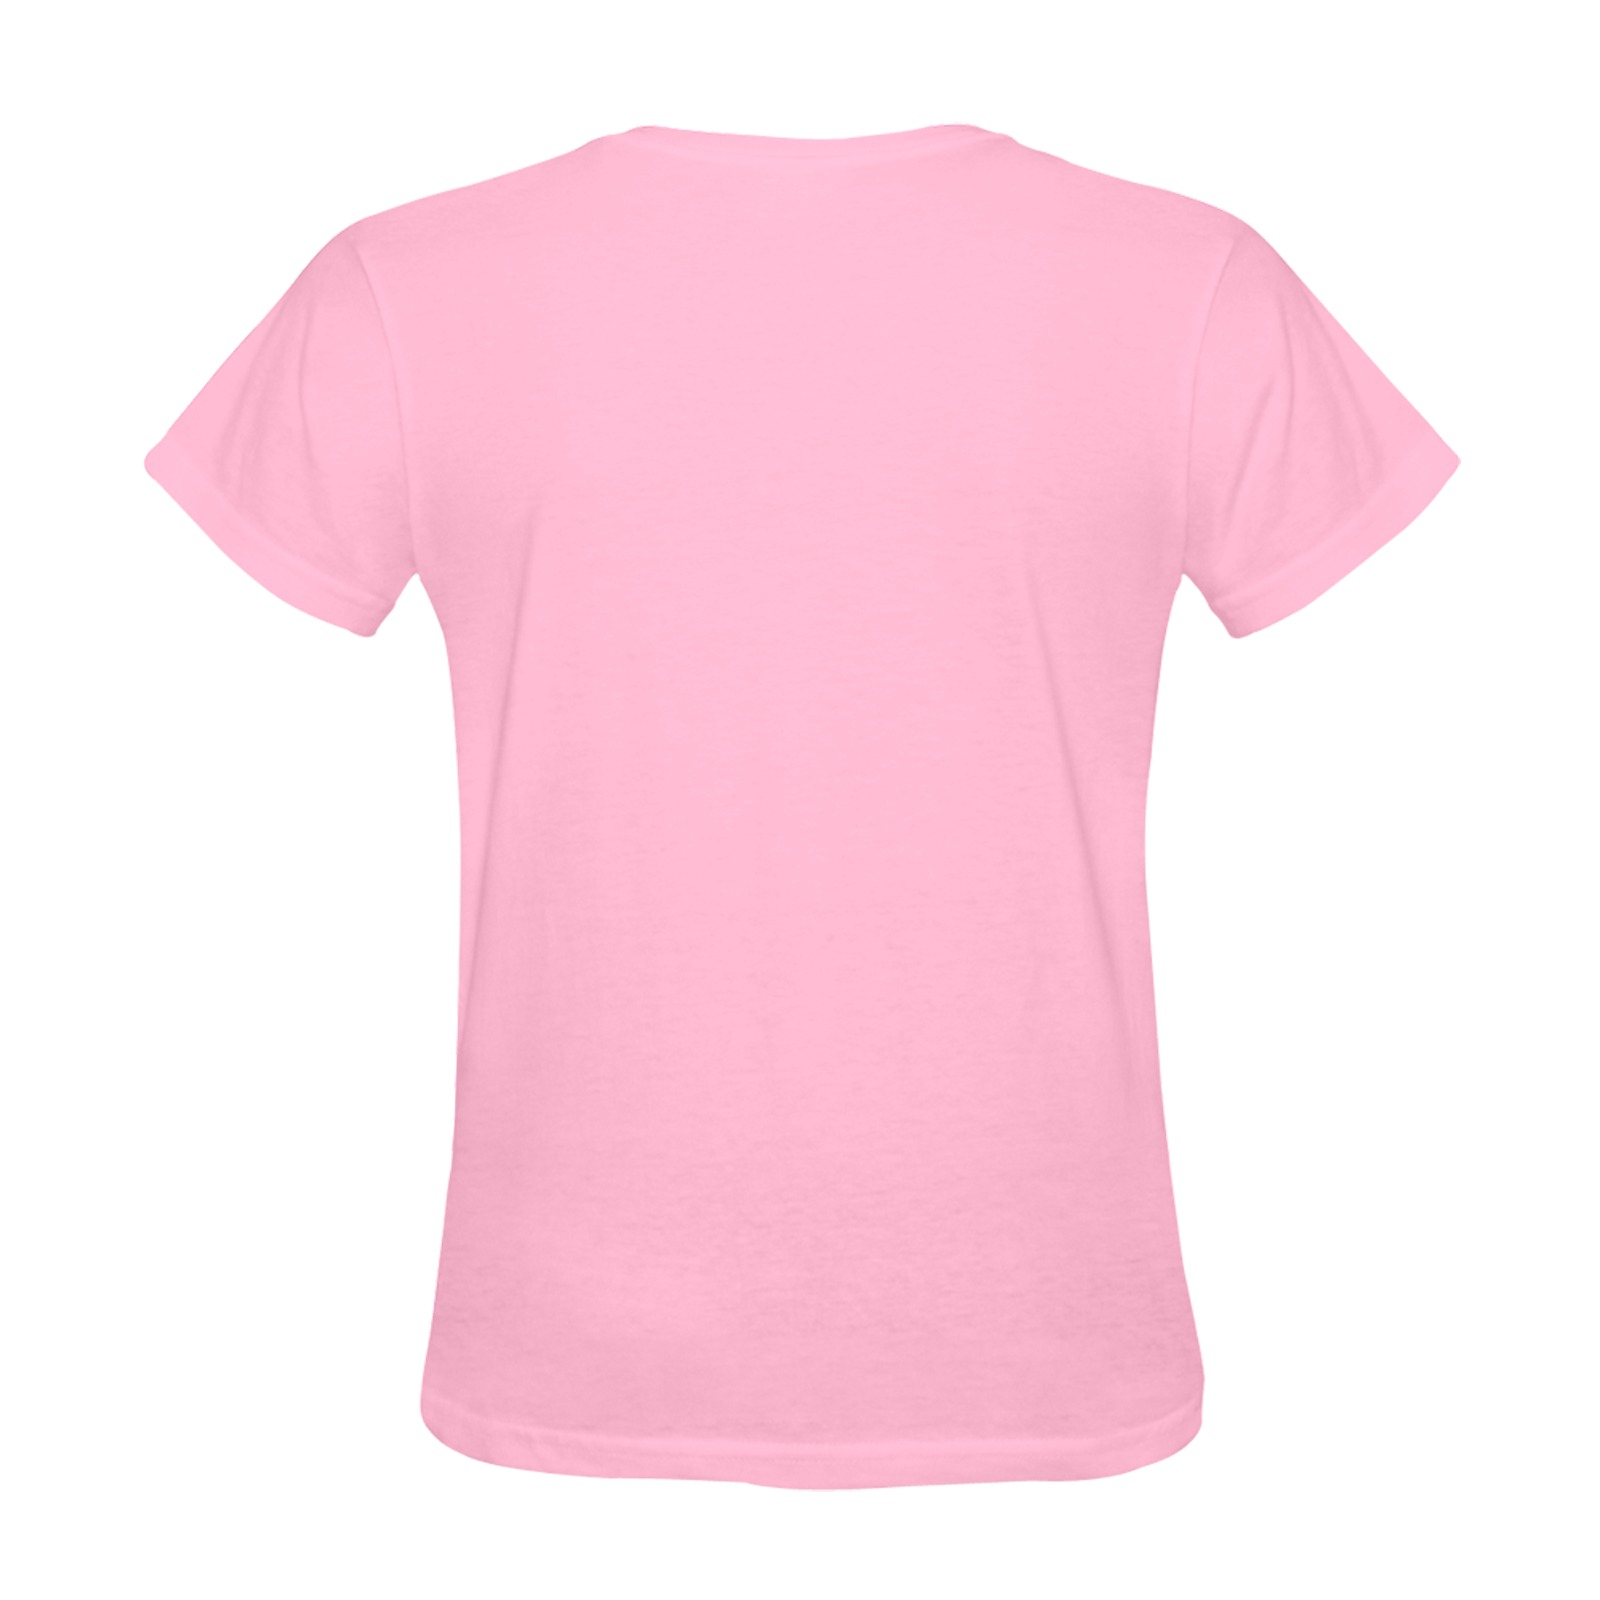 Black Cat with Bow Ties - Pink Sunny Women's T-shirt (Model T05)